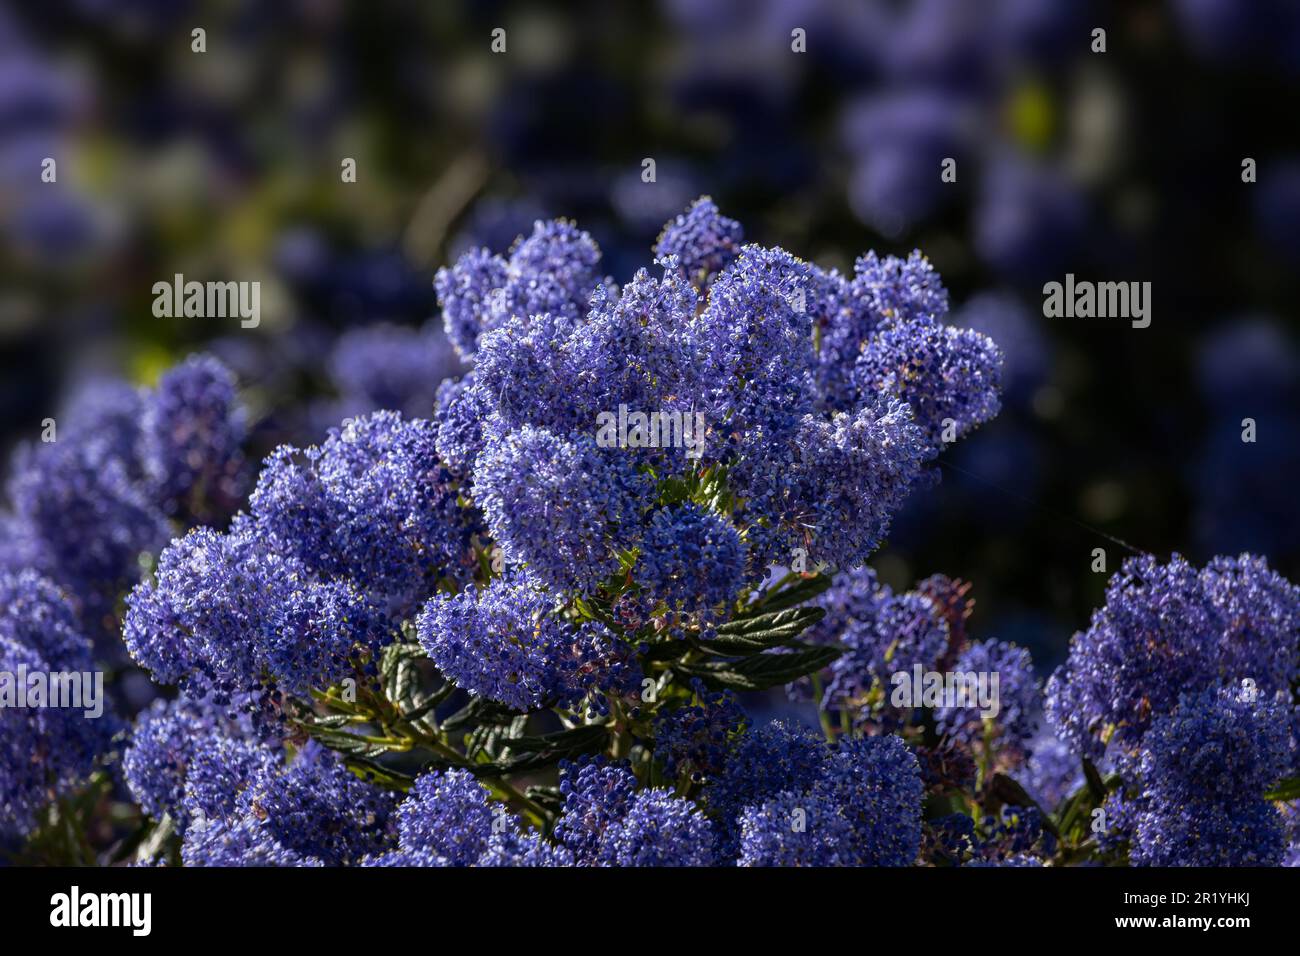 Closeup of flowers of Ceanothus 'Concha' in a garden in Spring Stock Photo